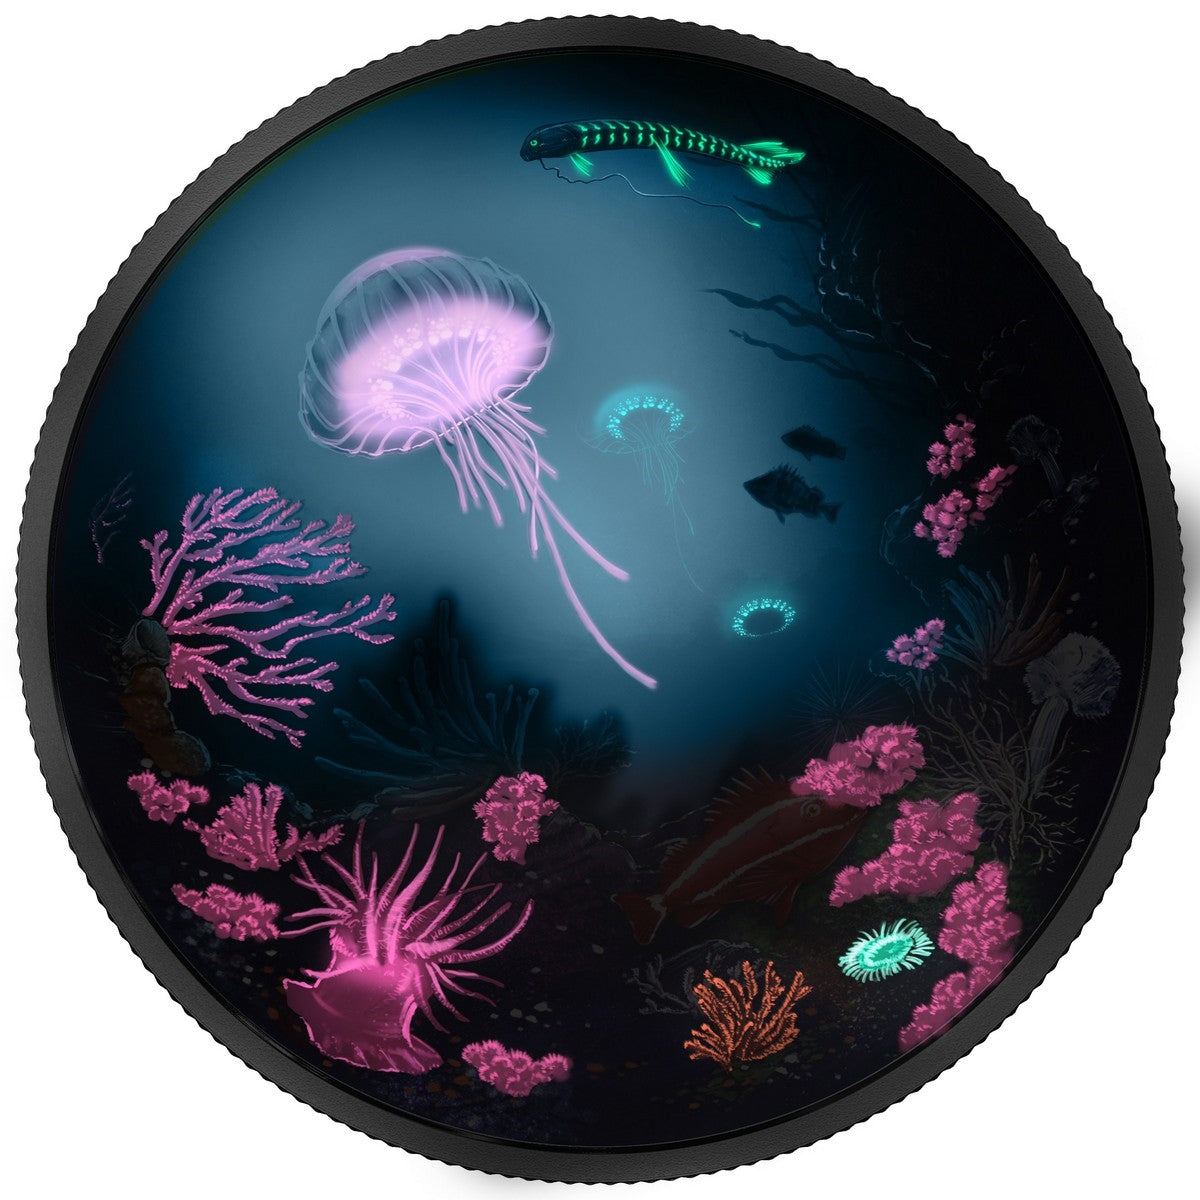 2 oz. Pure Silver Glow-in-the-Dark Coin - Illuminated Coral Reef - Mintage: 4,000 (2016)